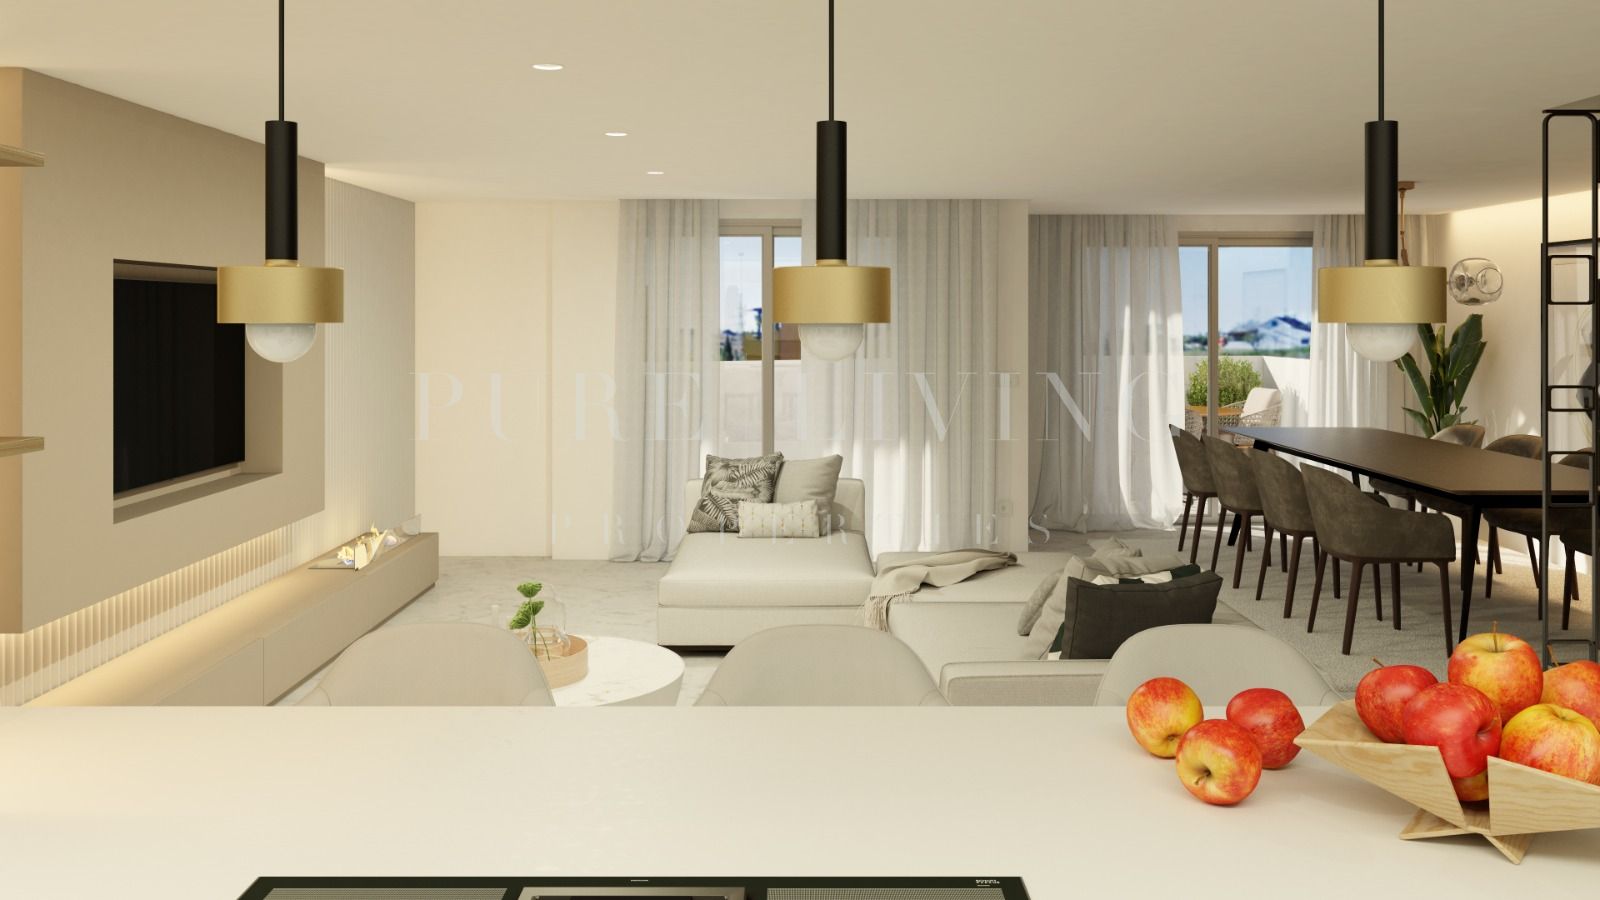 New development of luxury four-bedroom townhouses in Nagueles